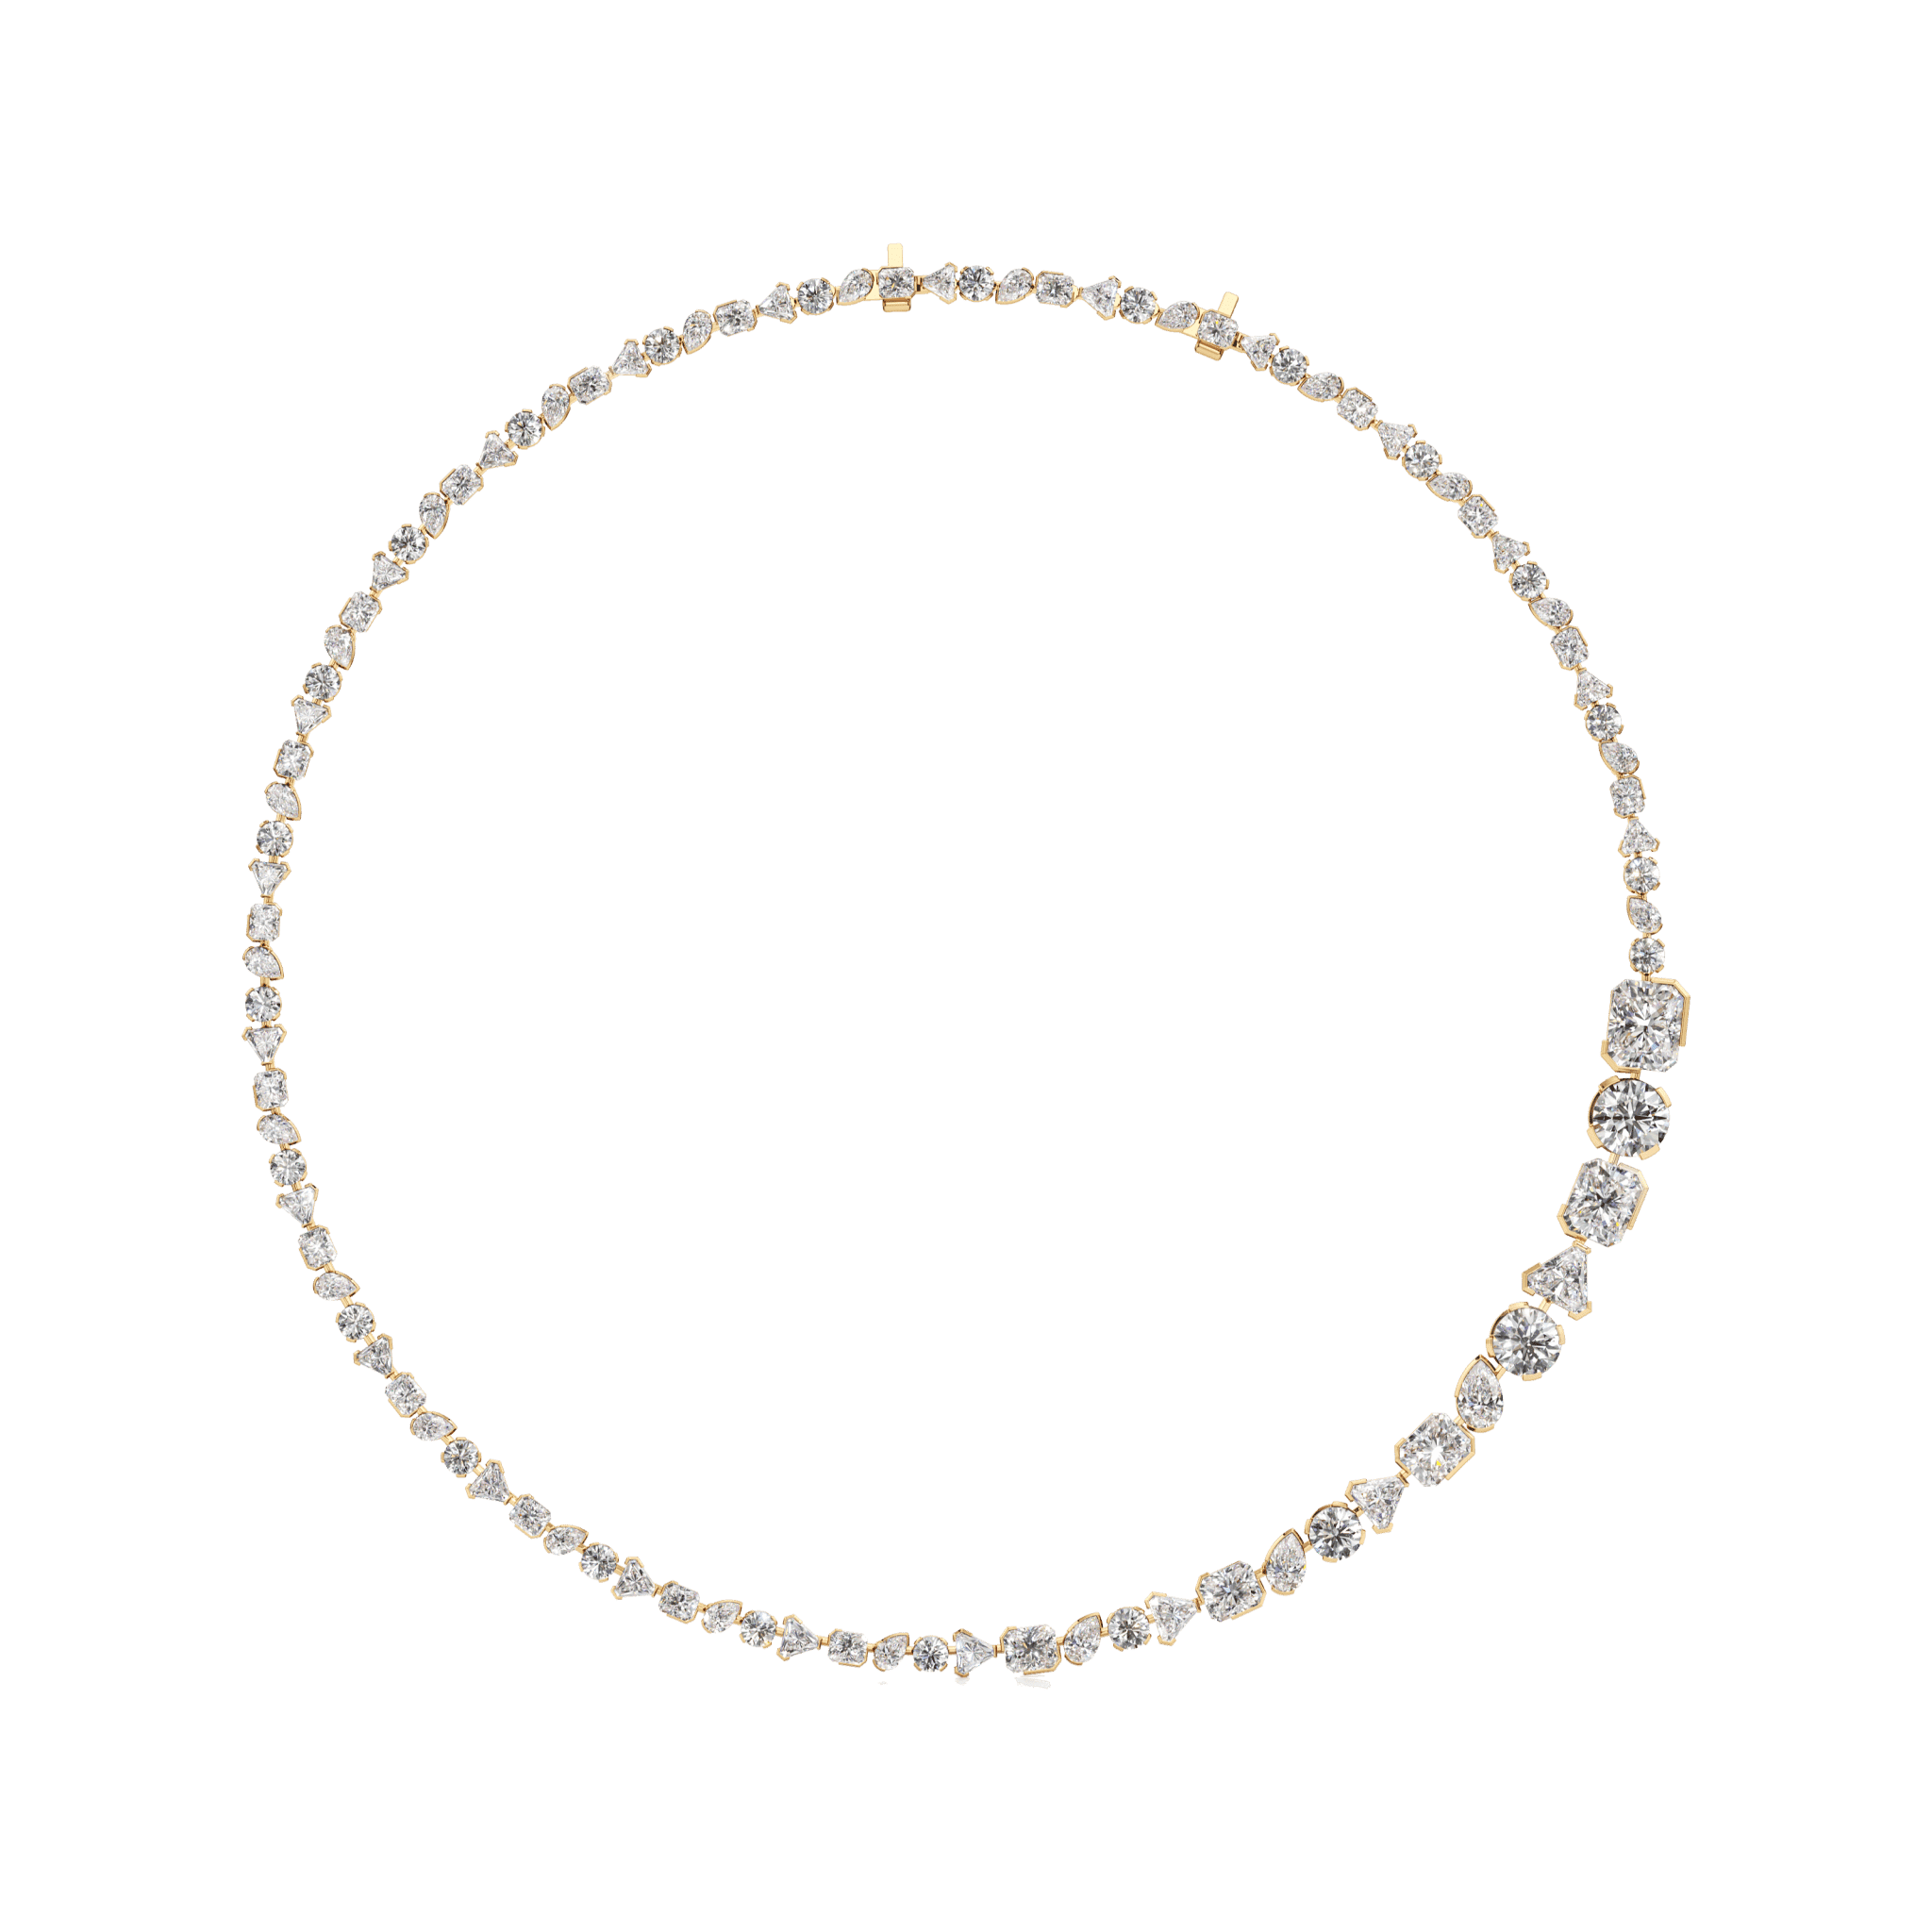 Buy Esteemed Emerald and Diamond Necklace, Statment Emerald Diamond Necklace  Setin Gold & White Gold Plating Online in India - Etsy